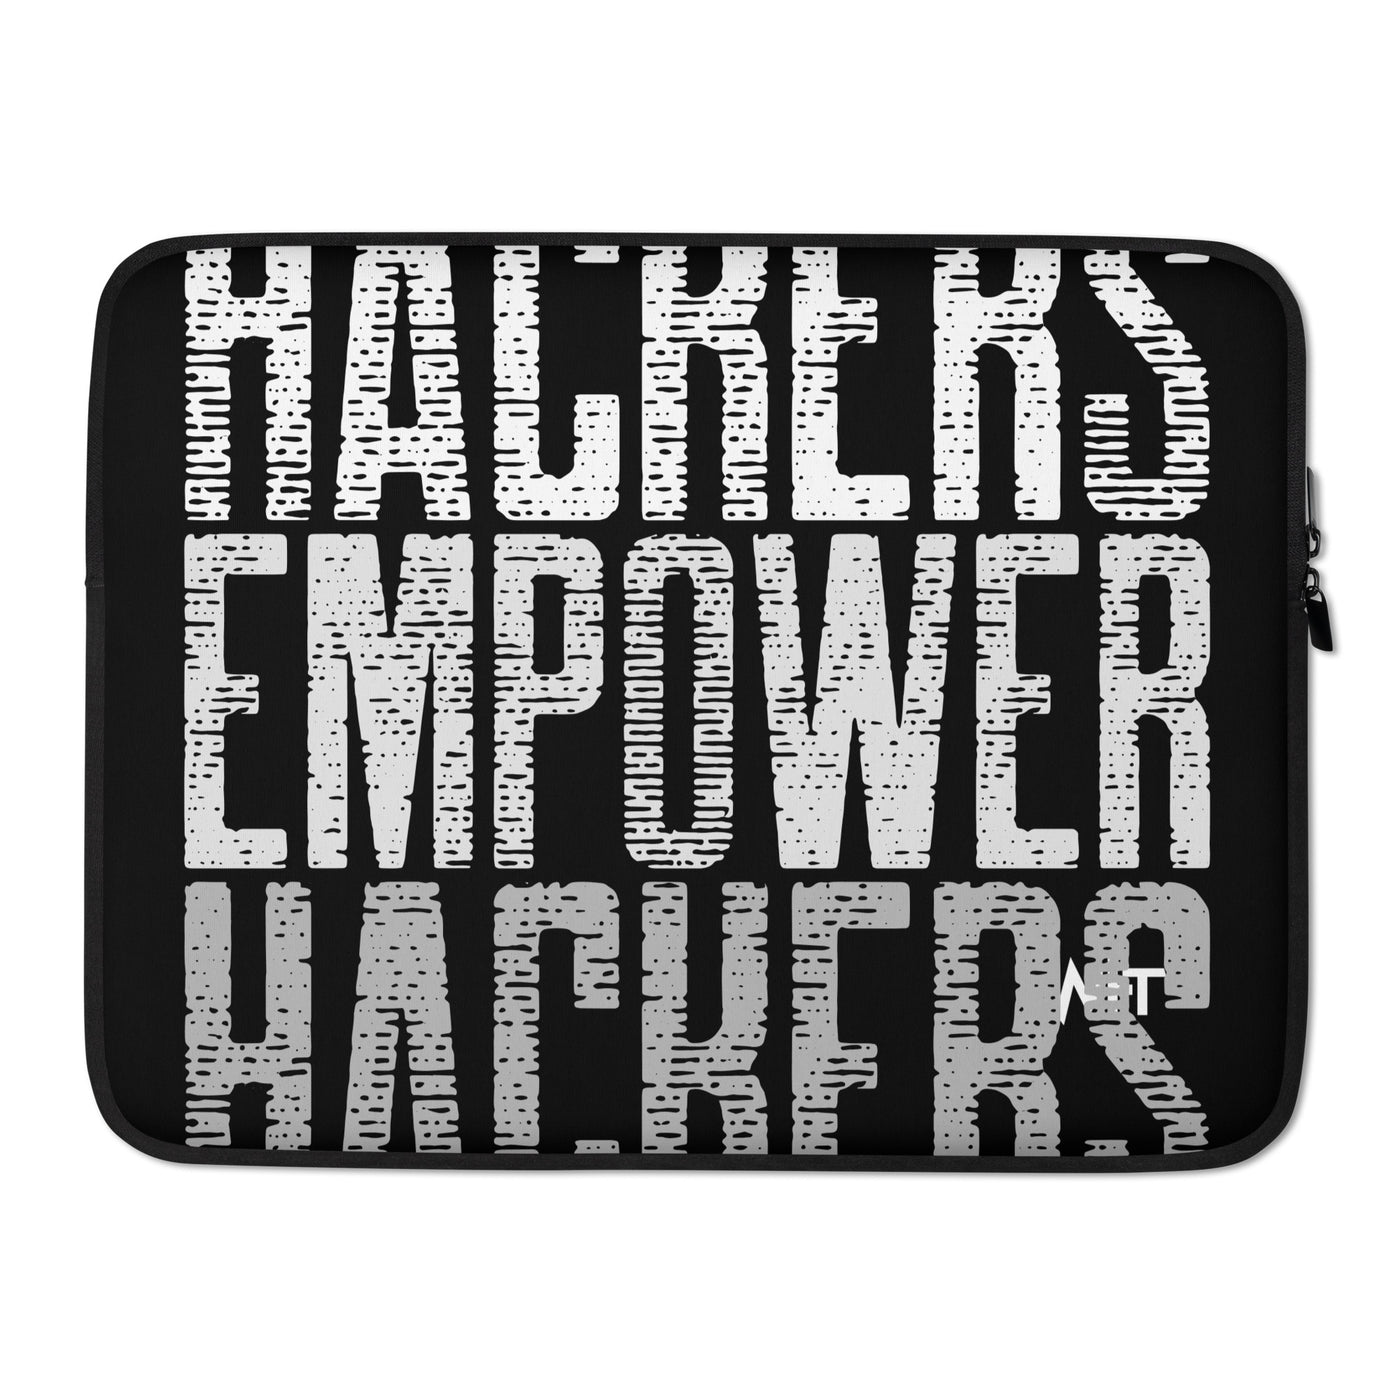 Hackers Empower Hackers V1 - Laptop Sleeve